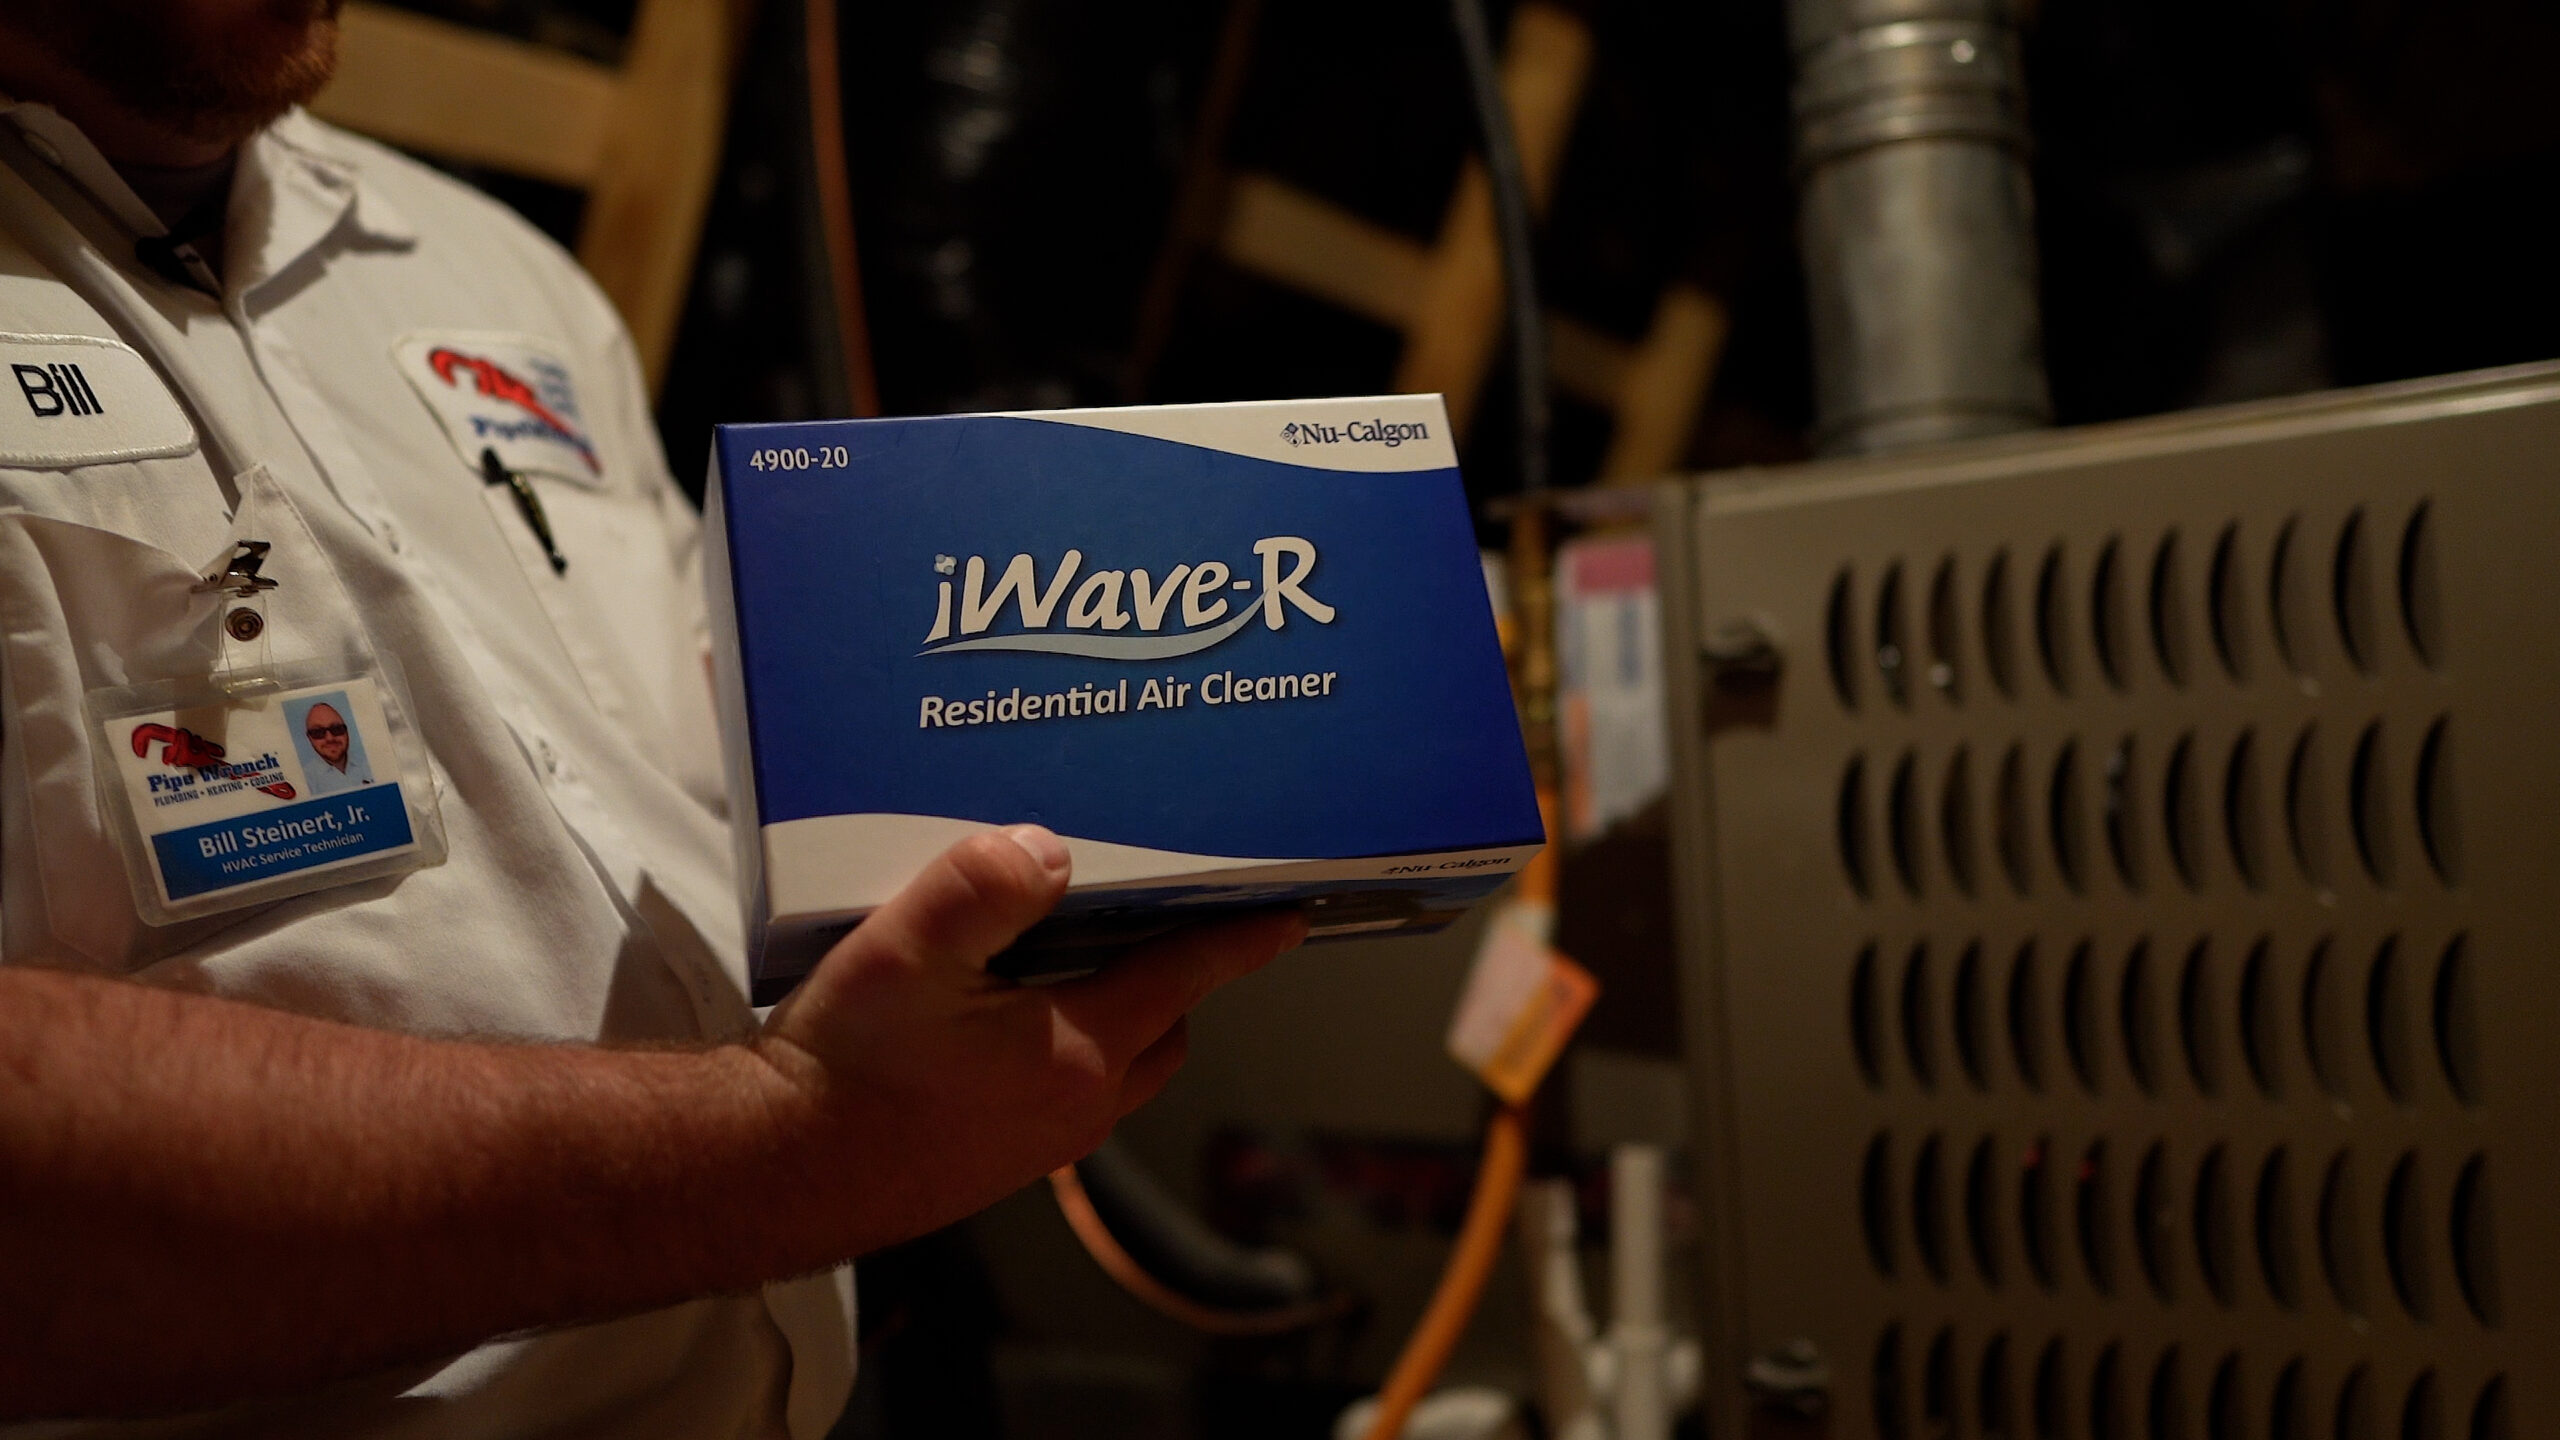 Technician holding iWave air cleaner box in front of HVAC unit